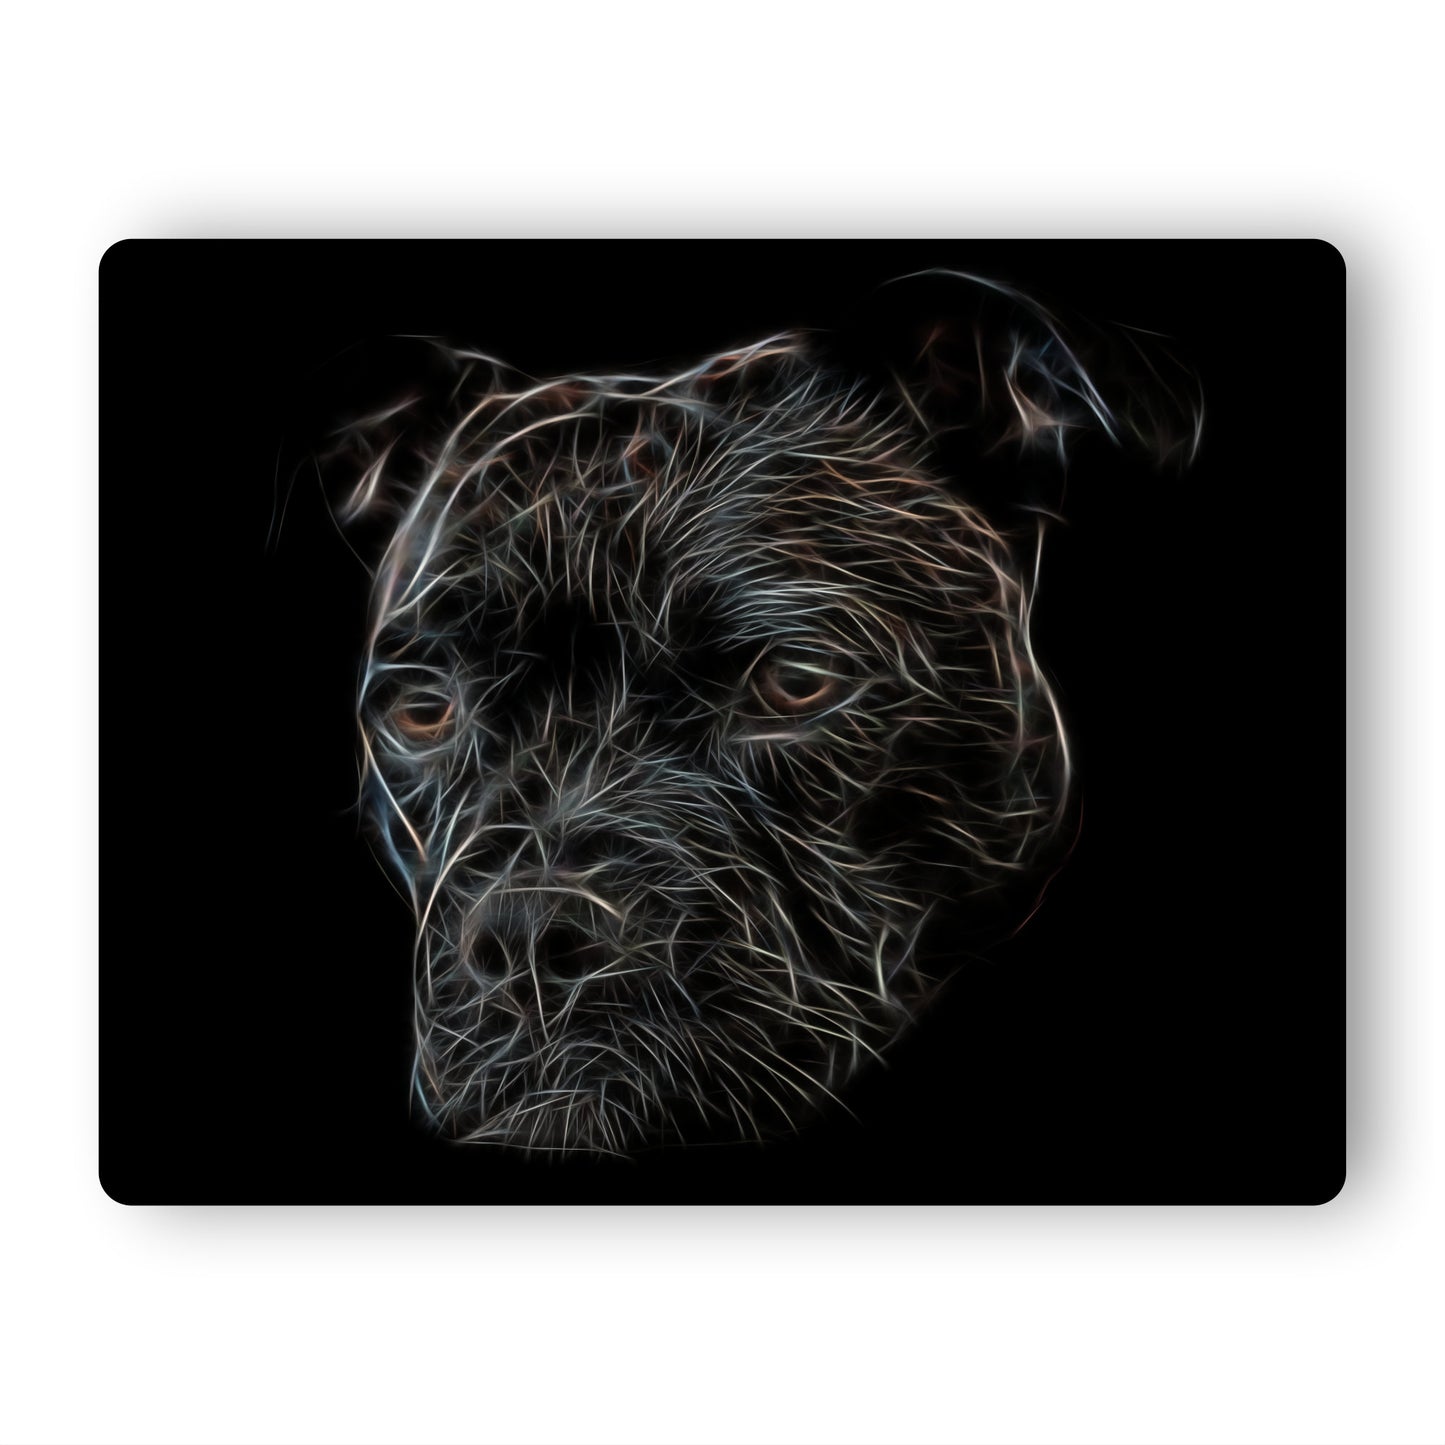 Black Staffordshire Bull Terrier Metal Wall Plaque with Fractal Art Design,  Perfect Dog Owner Gift.